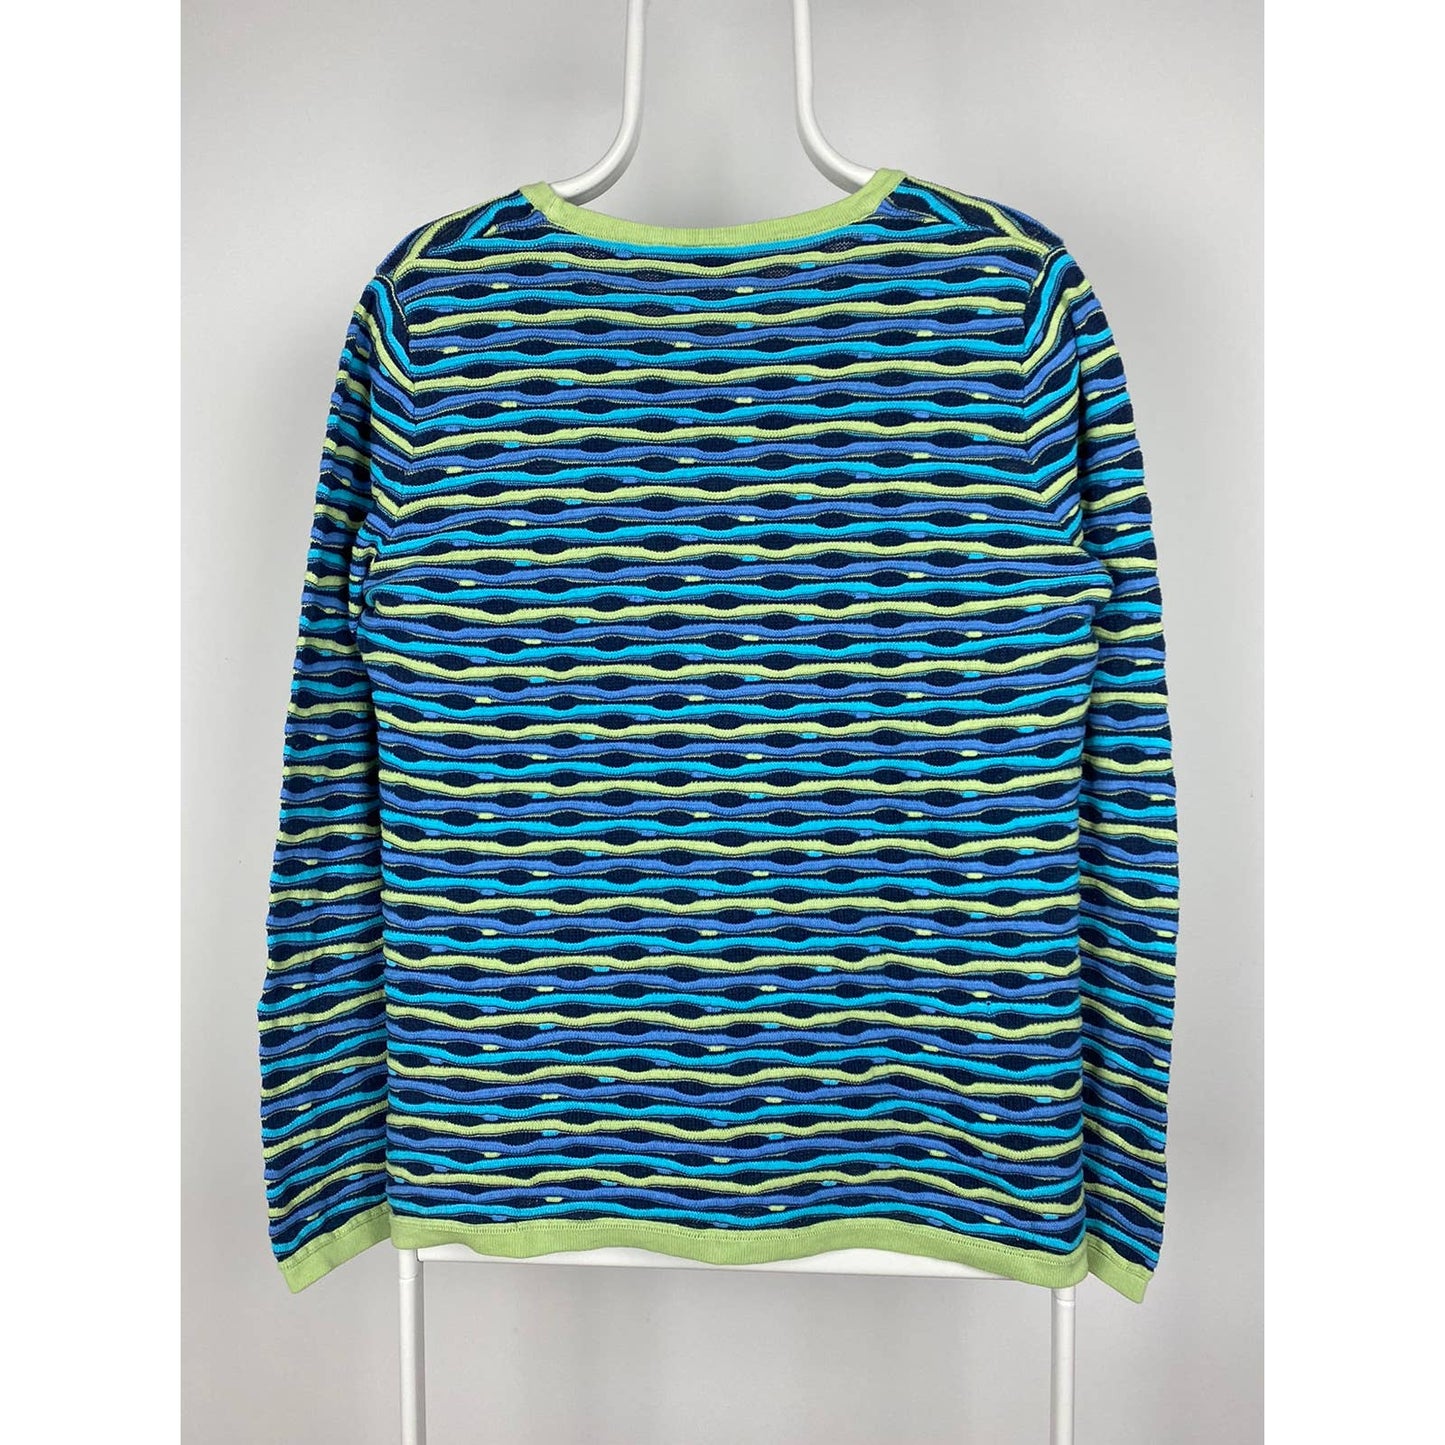 Vintage Coogi style sweater blue coloured cable knit sweater